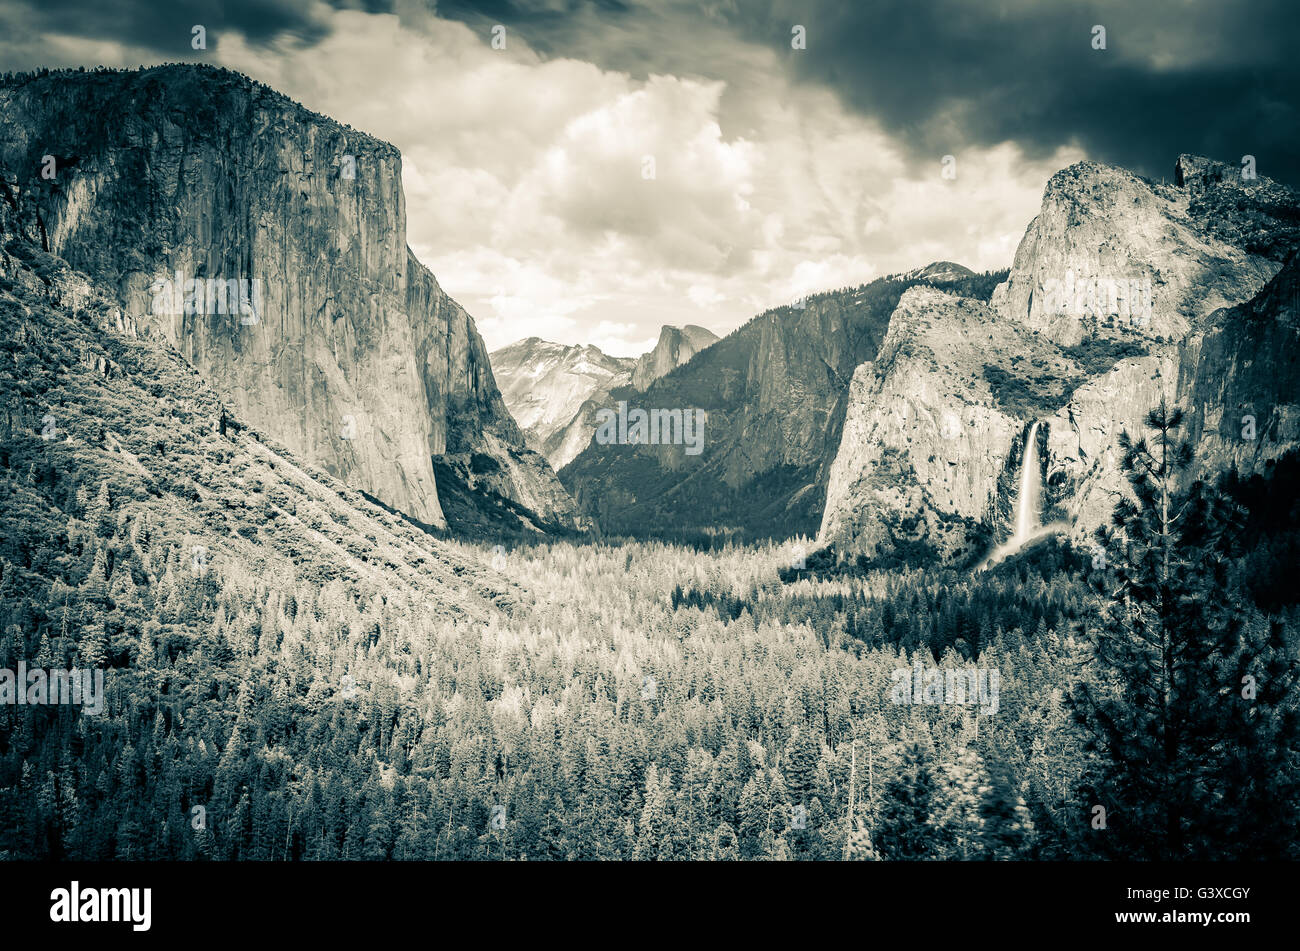 A day in Yosemite National Park - California Stock Photo